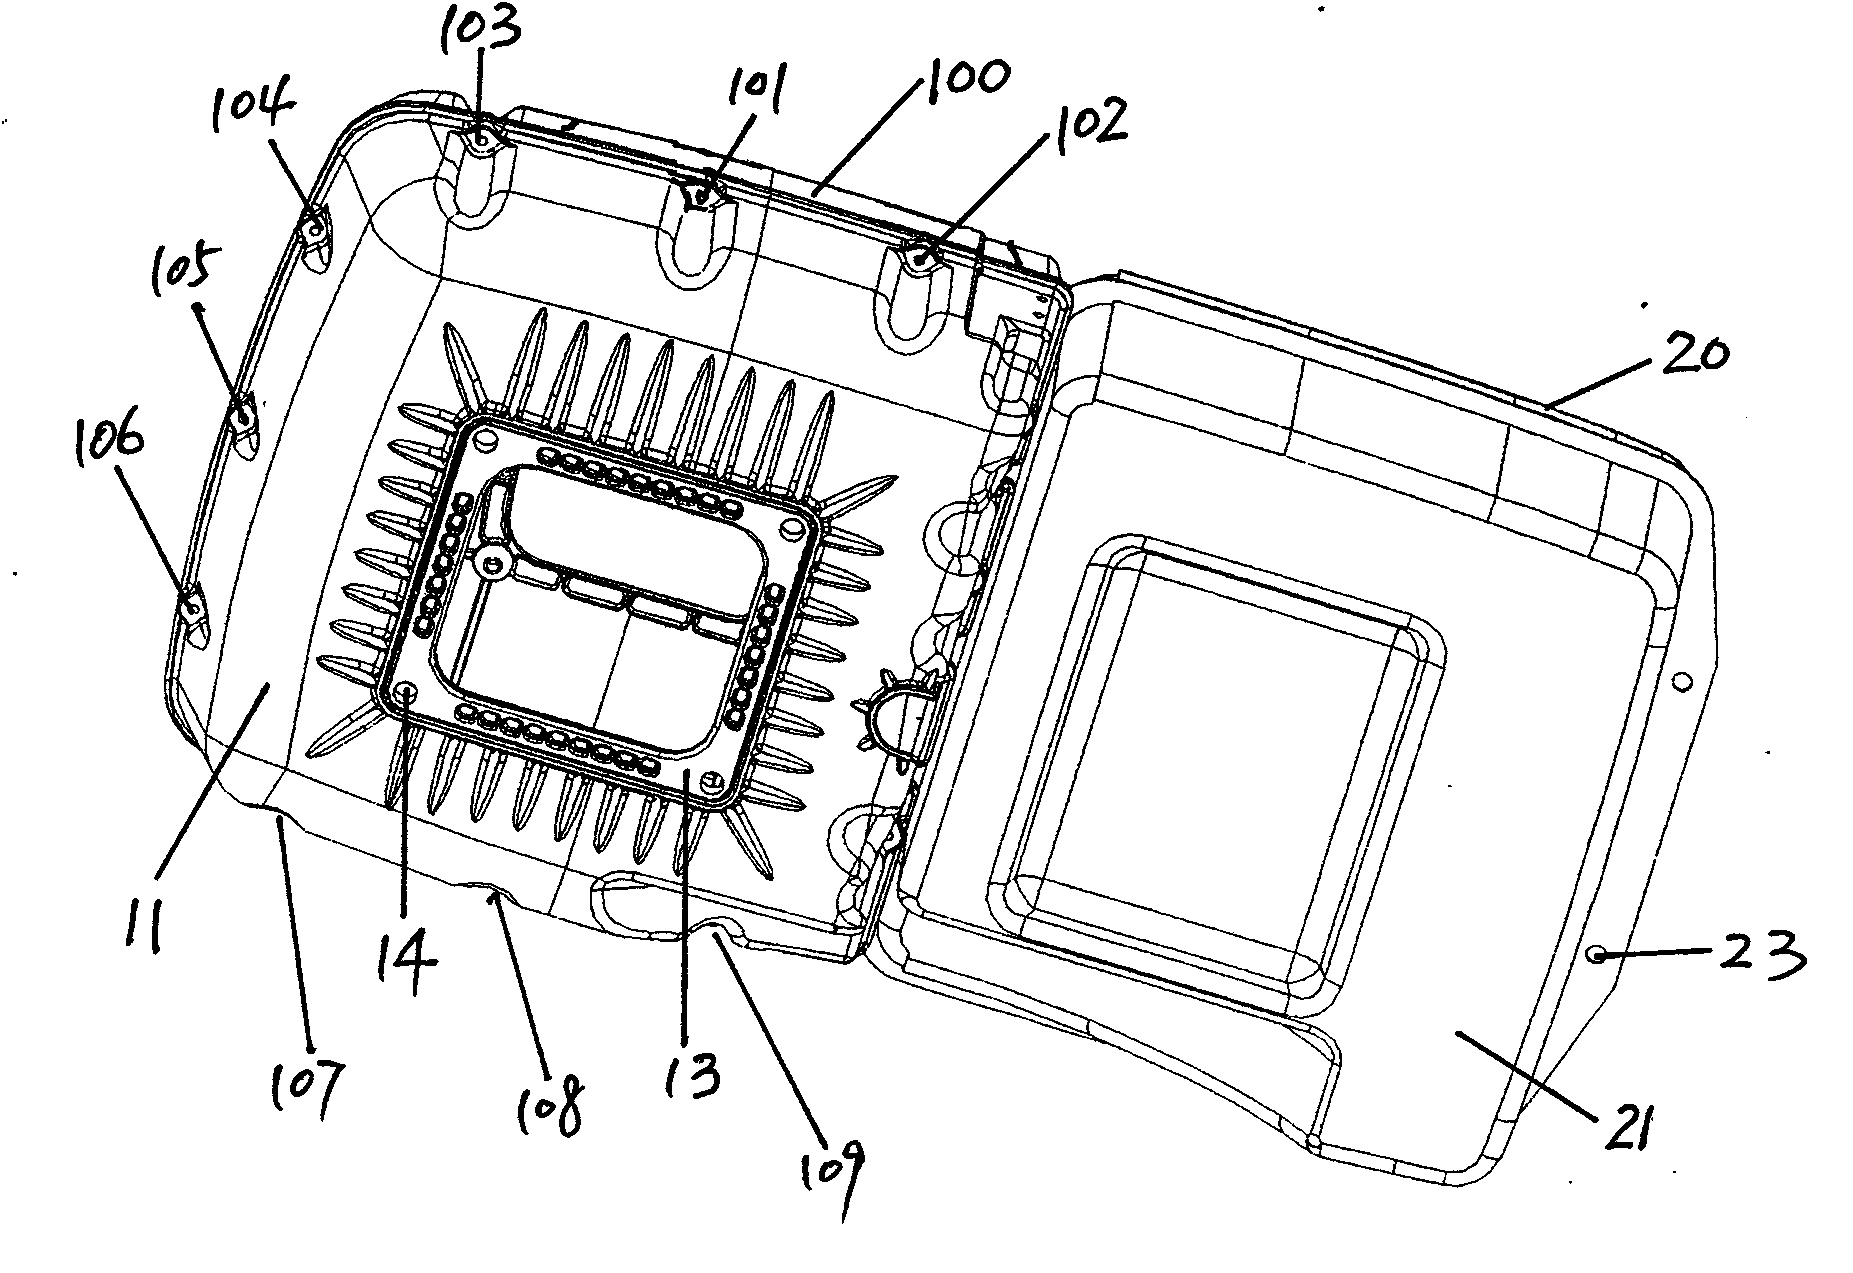 Water tank and horizontal single-cylinder evaporative diesel engine with same